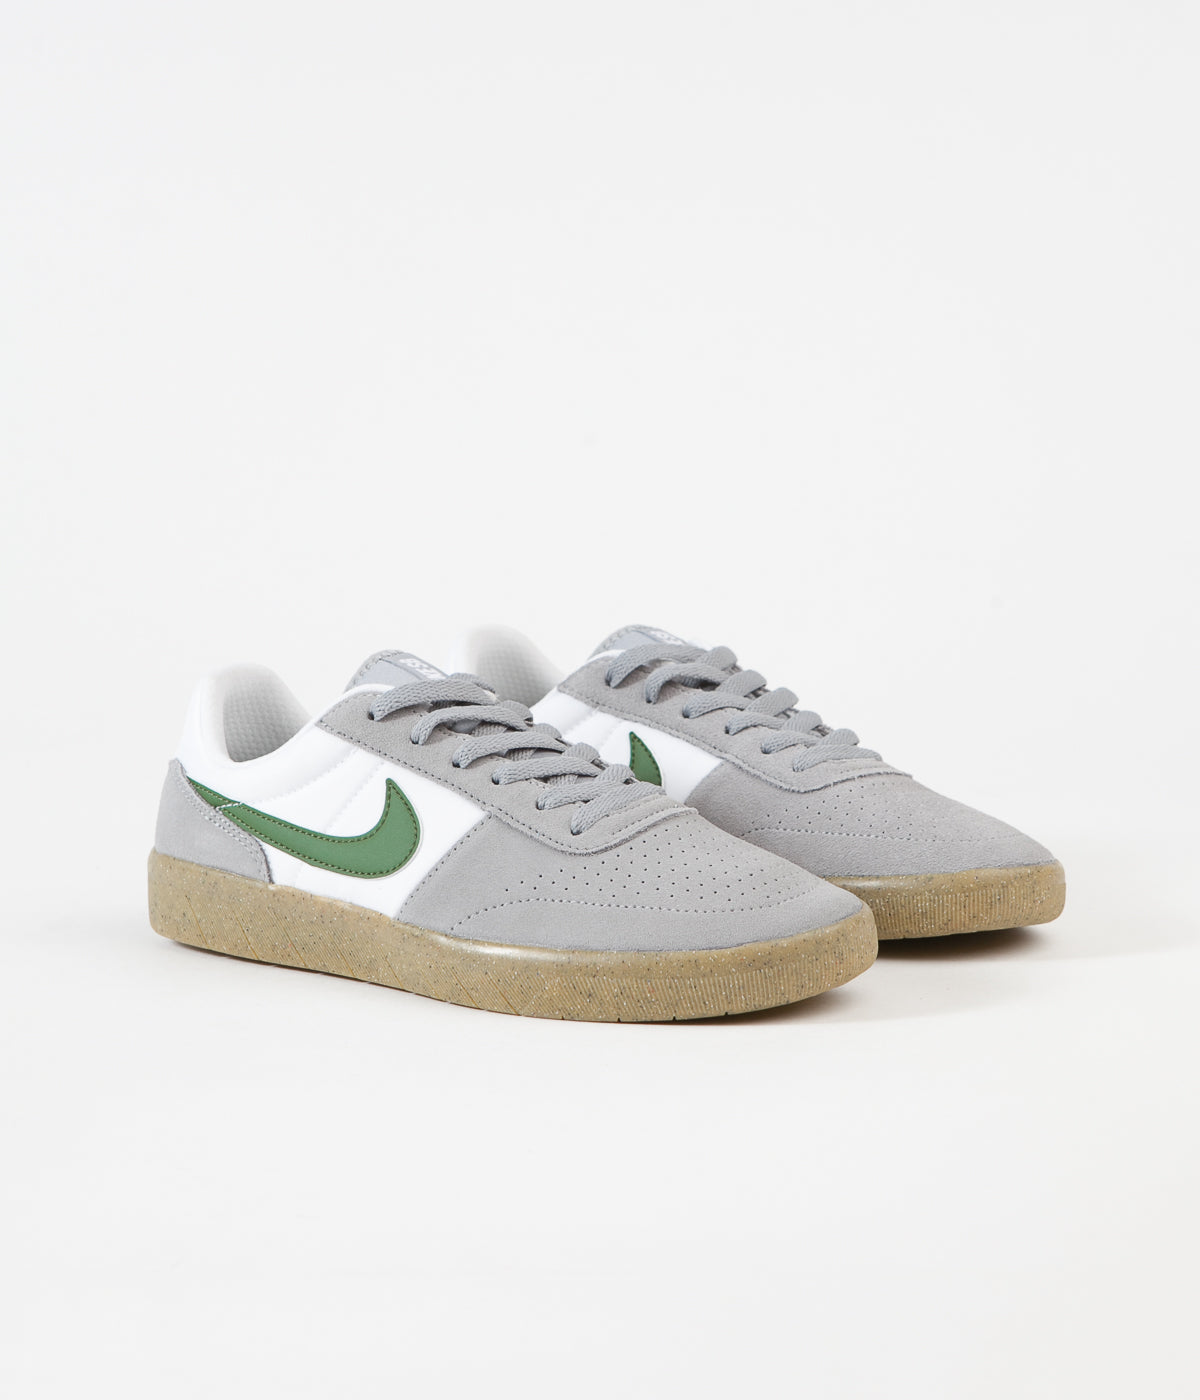 Nike SB Team Classic Shoes | Nike Solid Mens Swimming Jammer - Particle G - AlwancolorShops Particle Grey Green